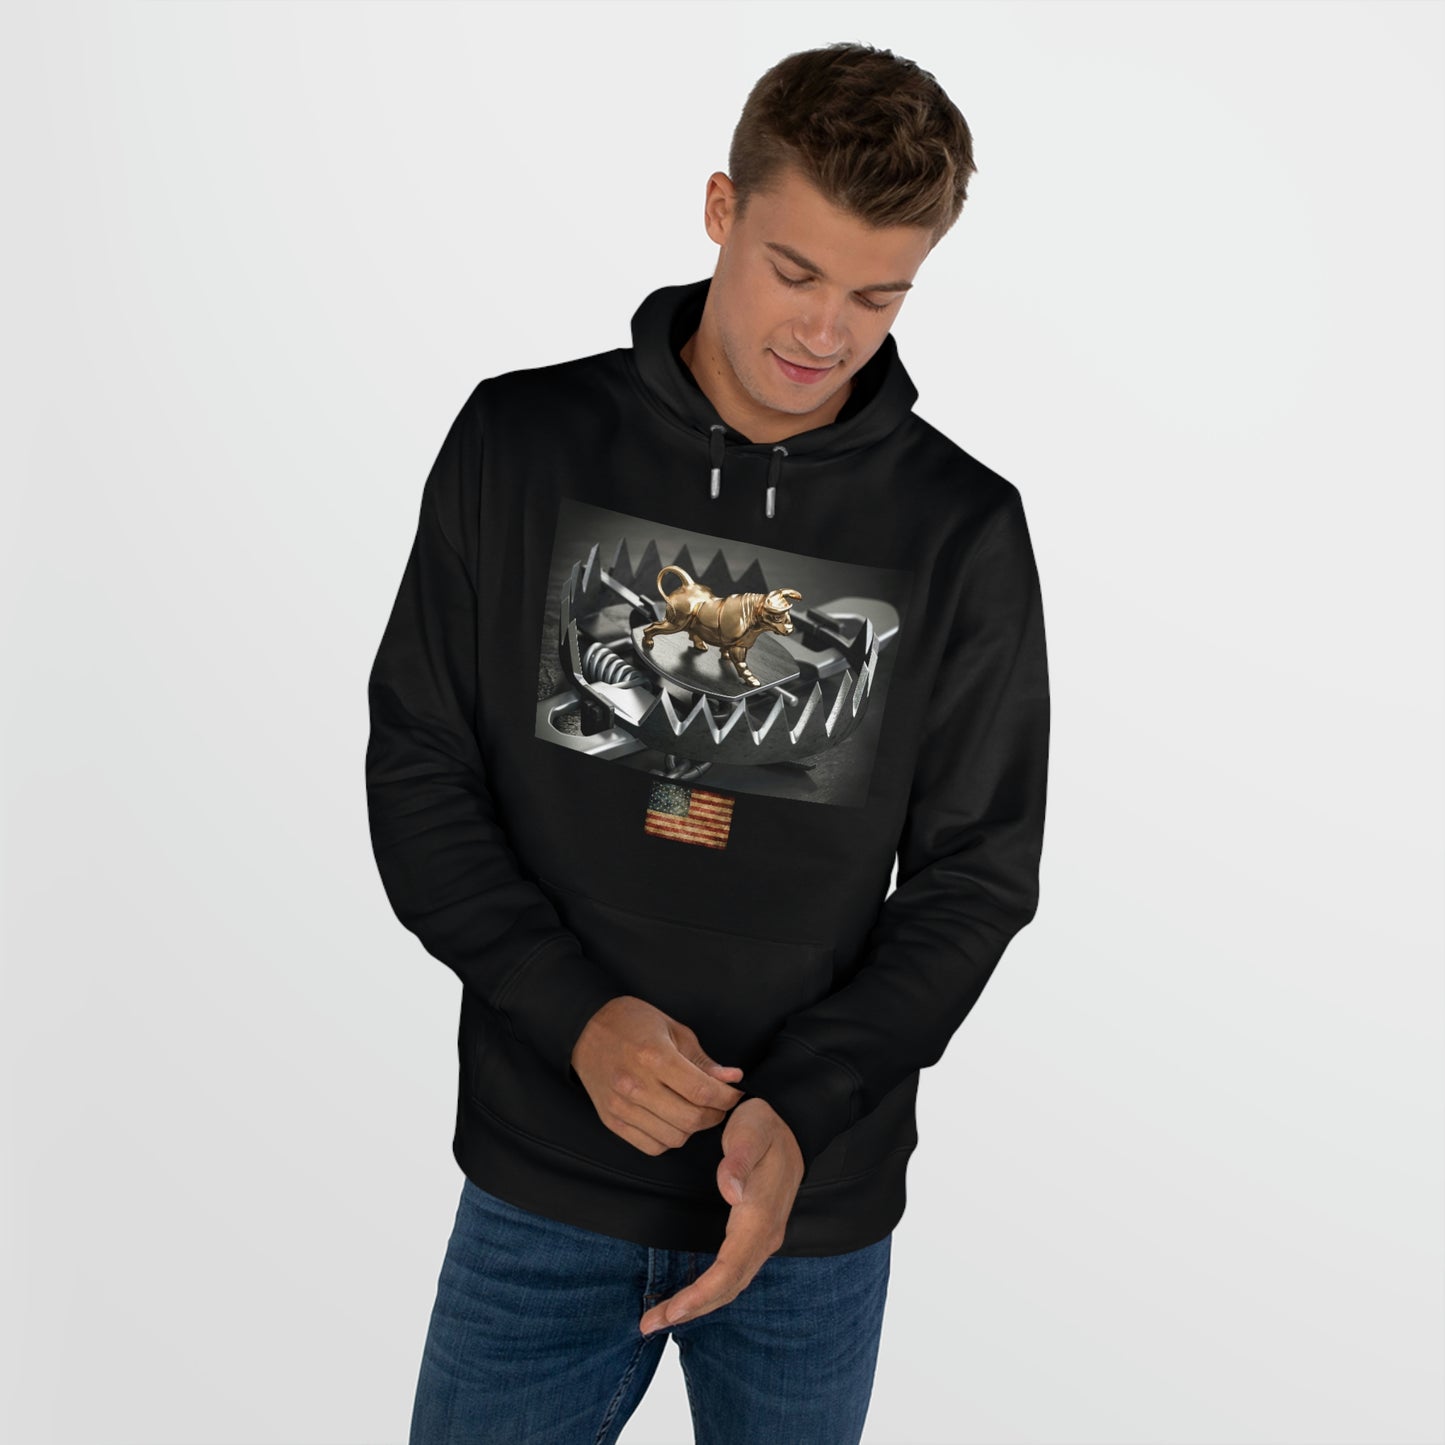 Stay Warm and Fashionable with Our Stock Market Bull Trap Fleece Comfy Hooded Sweatshirt - Perfect for the Savvy Investor!